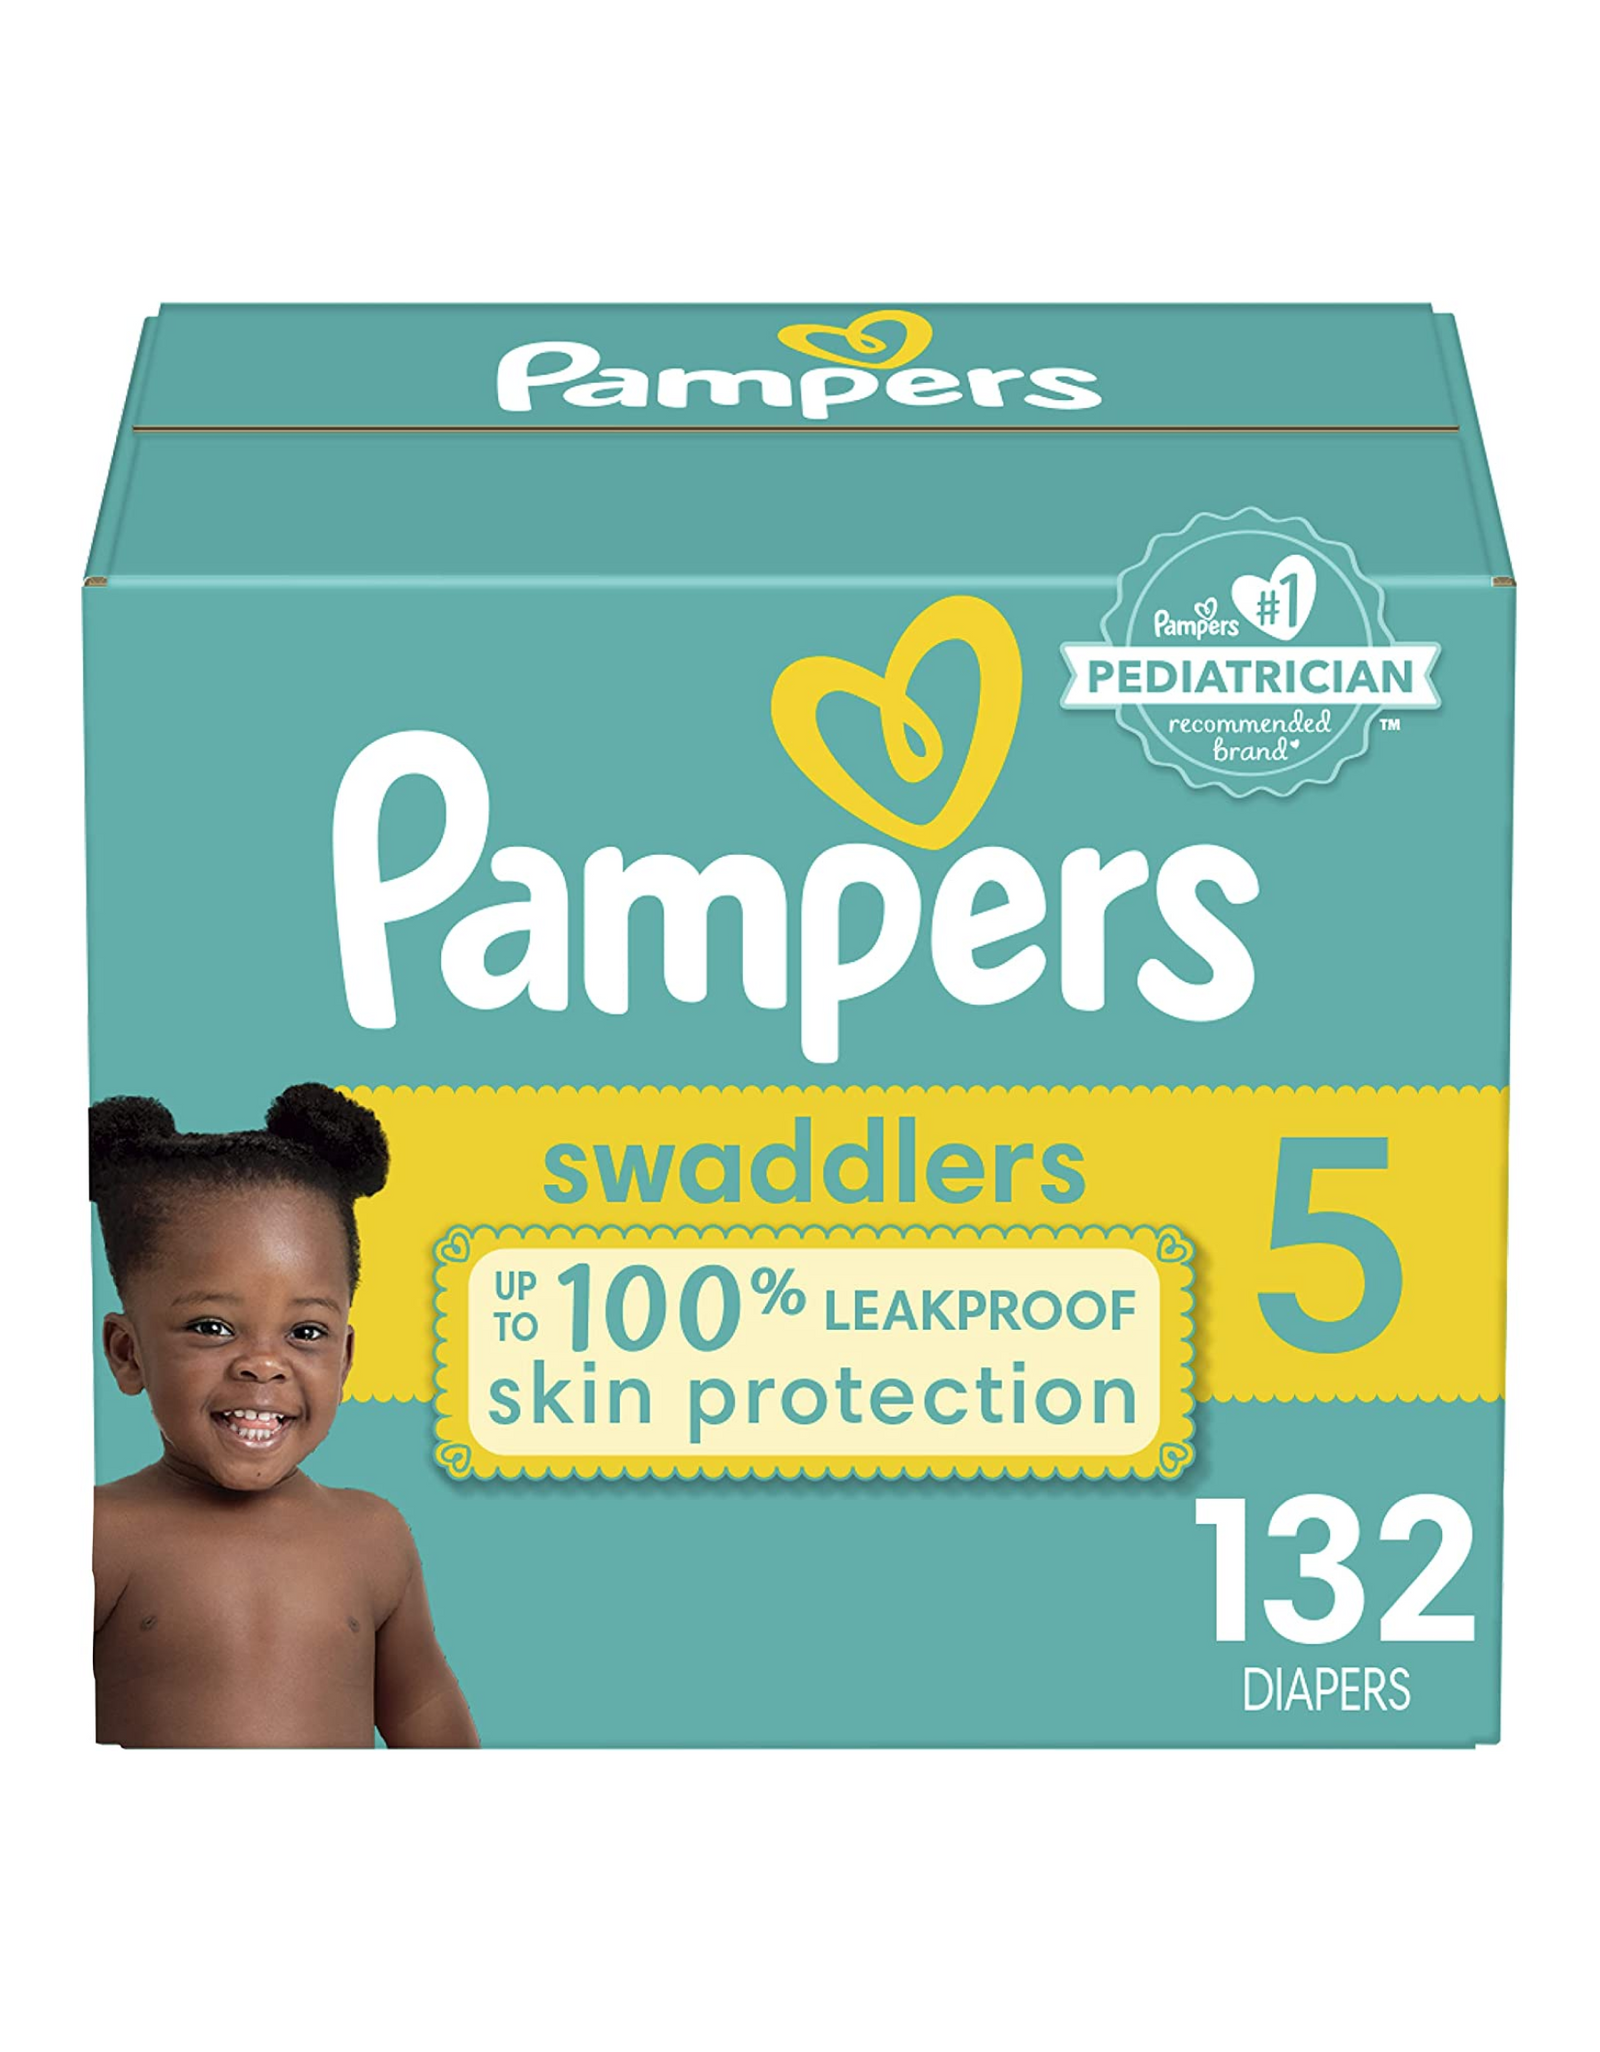 Diapers Size 5, 132 Count - Pampers Swaddlers Baby Diapers, One Month Supply (Packaging May Vary)